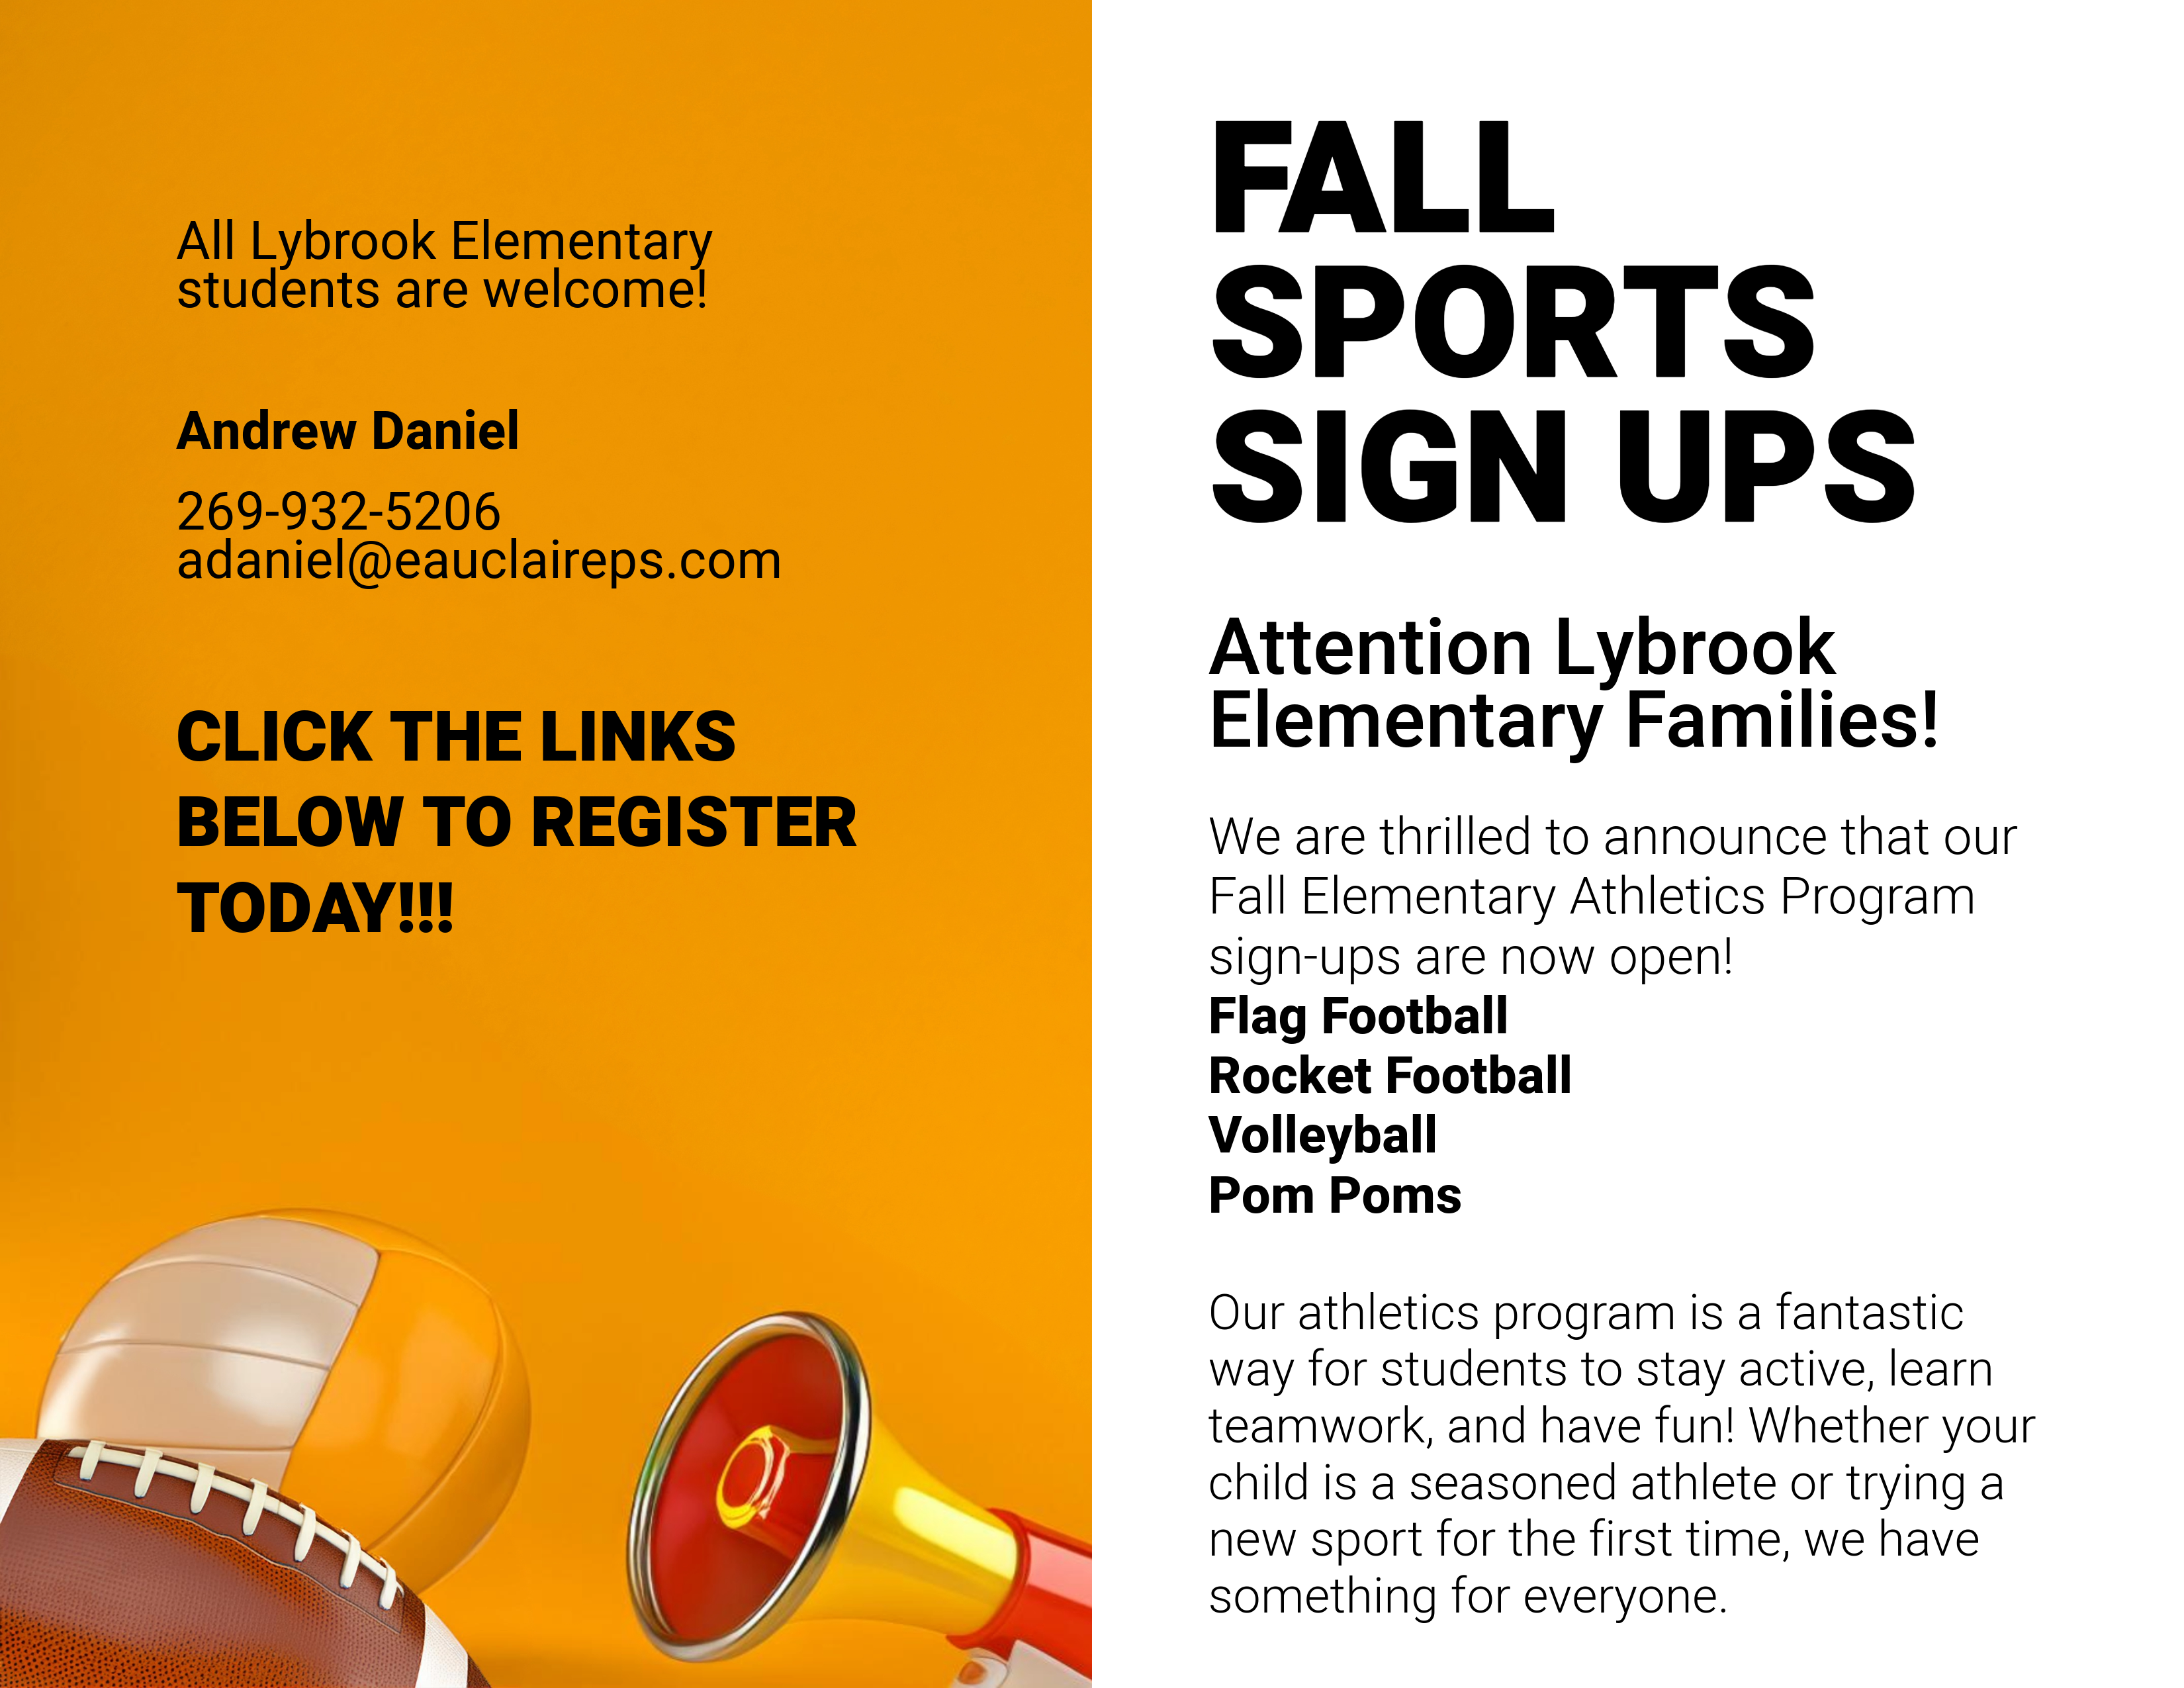  Attention Lybrook Elementary Families! 
We are thrilled to announce that our Fall Elementary Athletics Program sign-ups are now open!

Get ready for an exciting season of:

Flag Football 
Rocket Football
Volleyball 
Pom Poms

Our athletics program is a fantastic way for students to stay active, learn teamwork, and have fun! Whether your child is a seasoned athlete or trying a new sport for the first time, we have something for everyone.

Who Can Join: All Lybrook Elementary students are welcome!

Location: Lybrook Elementary School

For more information, please contact Andrew Daniel at 269-932-5206 or email at adaniel@eauclaireps.com